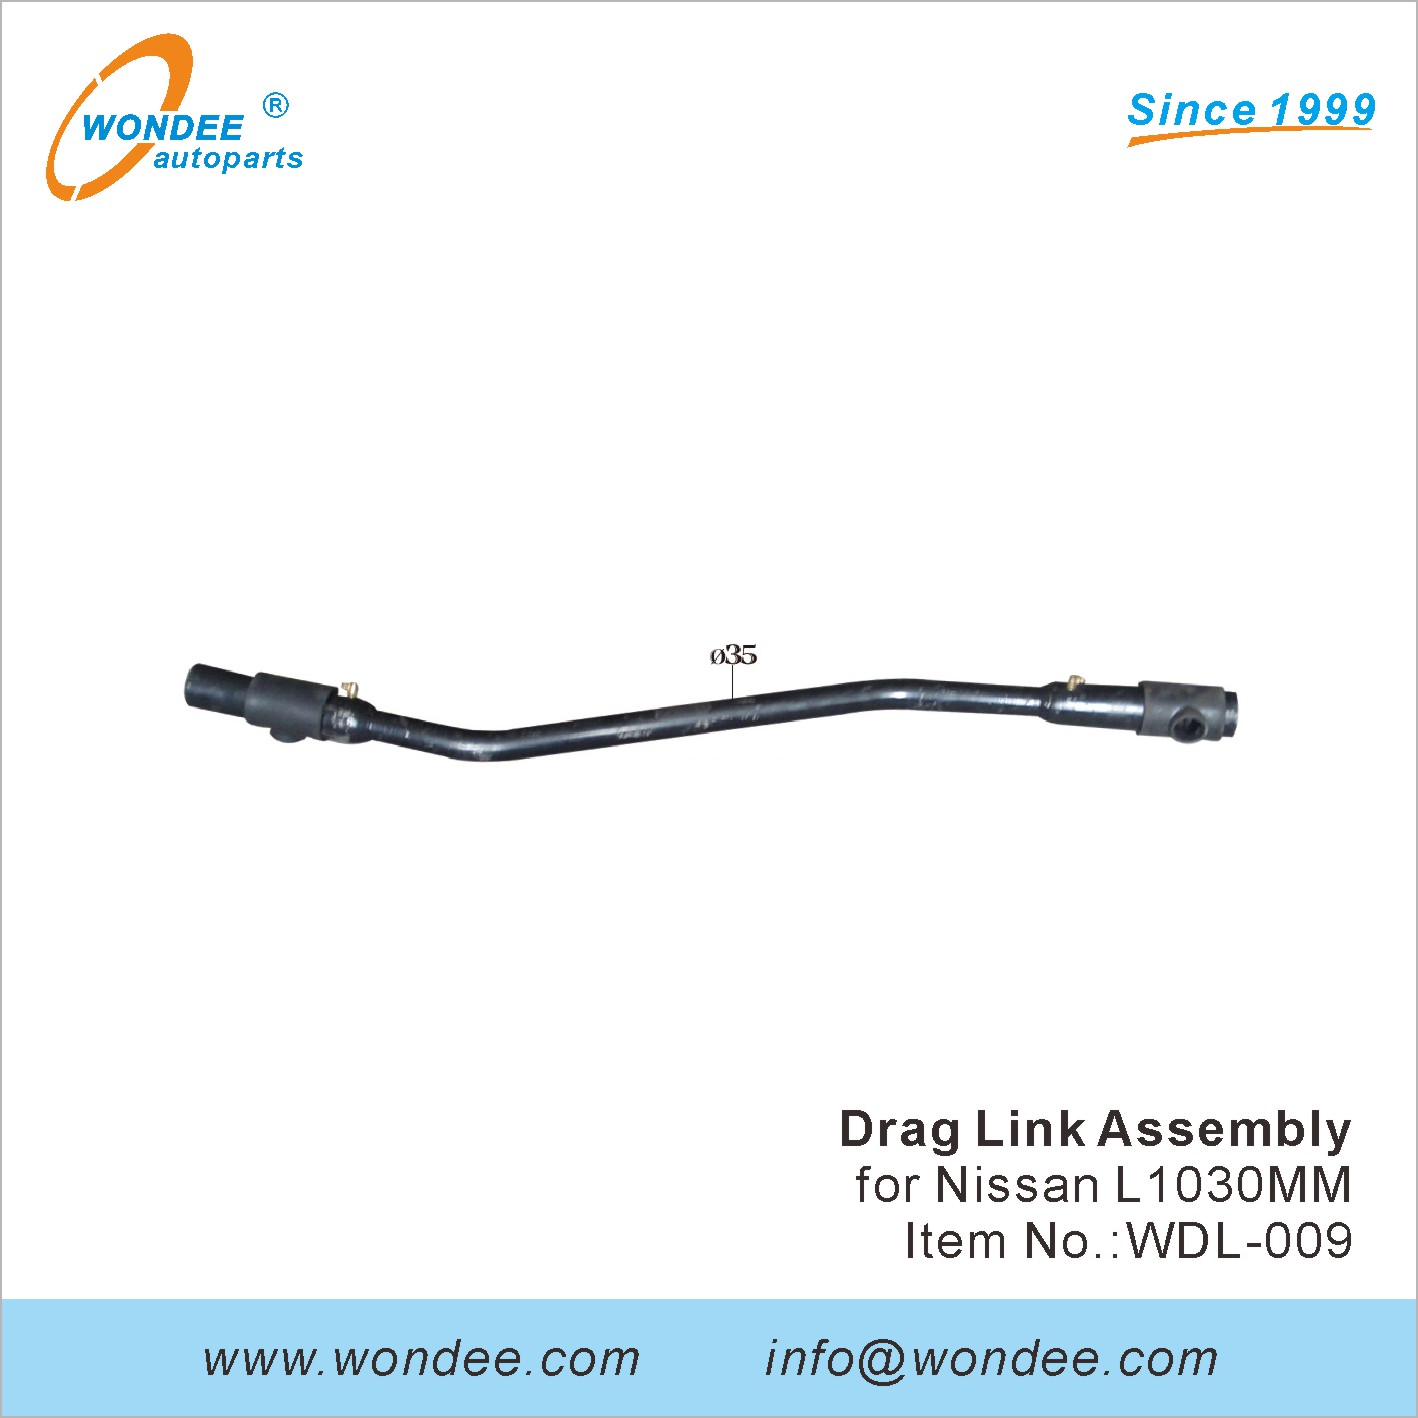 WONDEE drag link assembly (9)